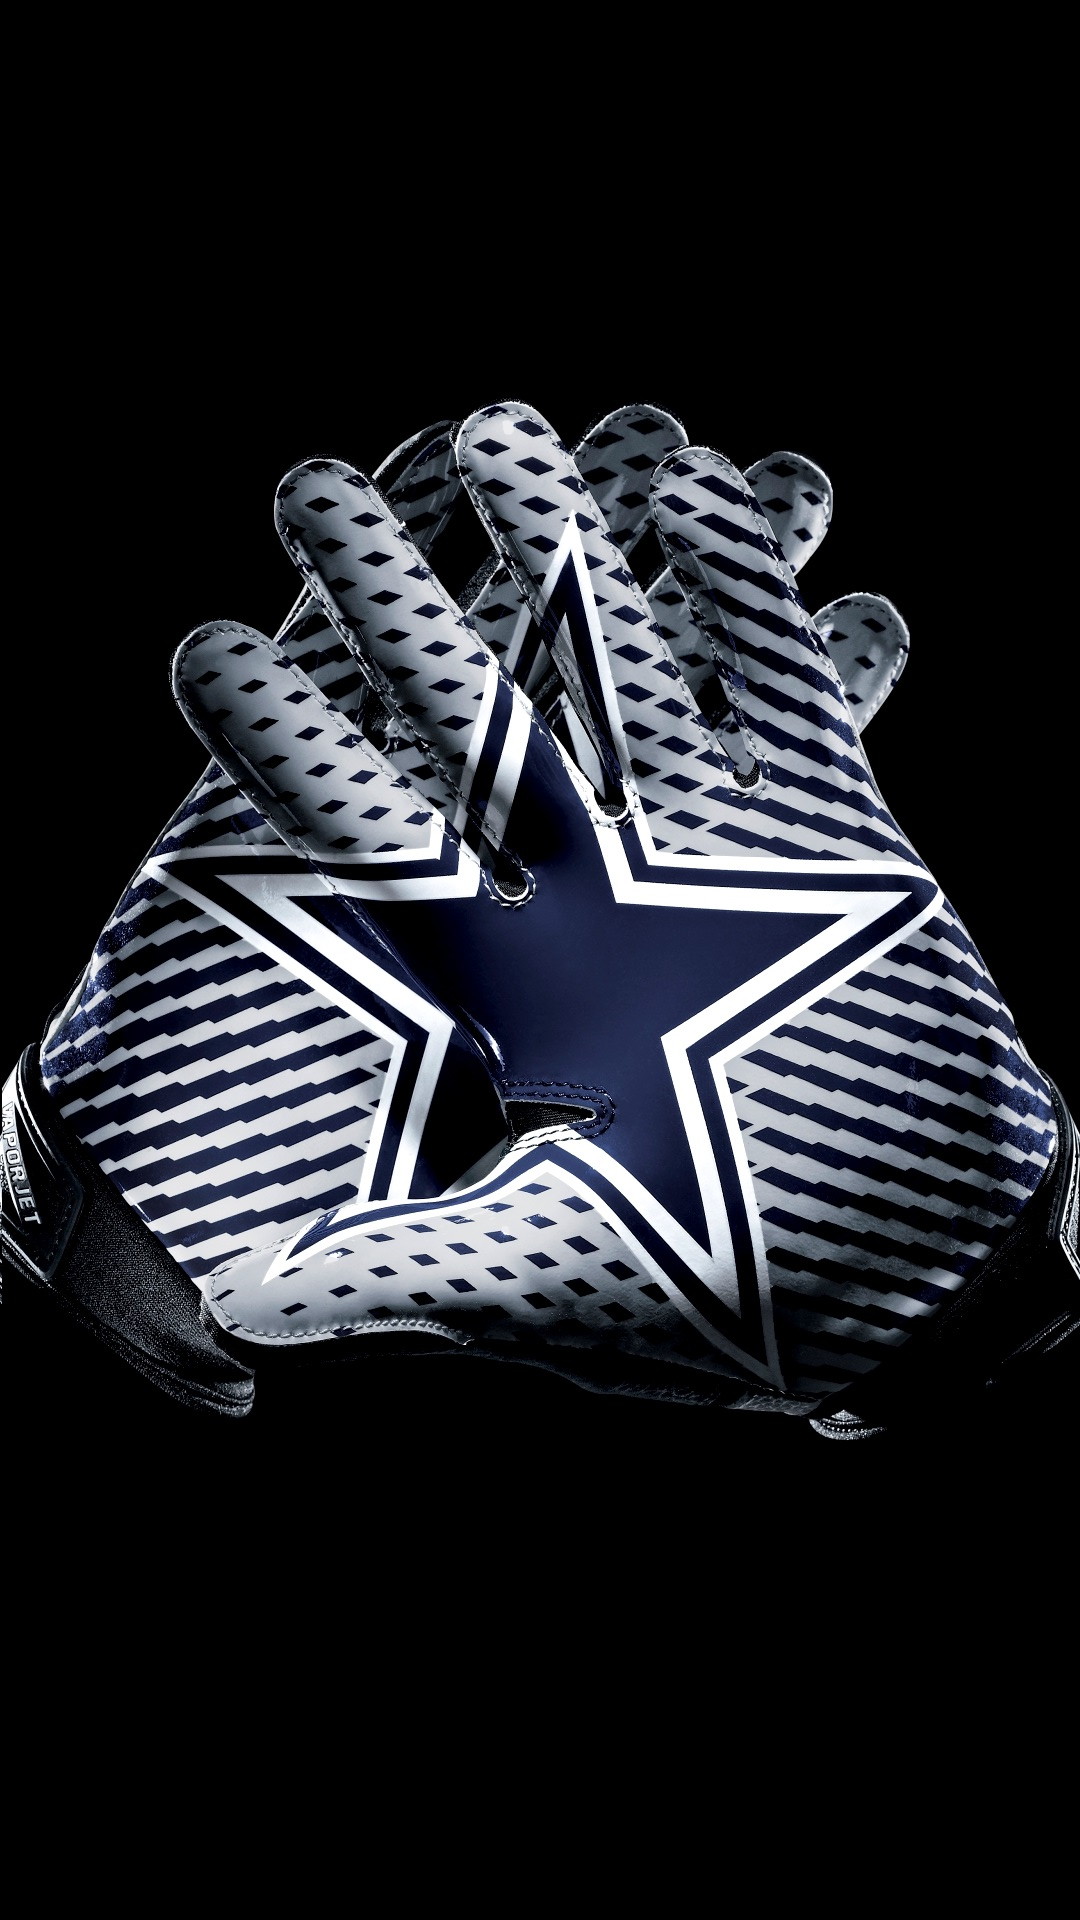 Best Dallas Cowboys Phone Wallpaper in HD with high-resolution 1080x1920 pixel. You can use and set as wallpaper for Notebook Screensavers, Mac Wallpapers, Mobile Home Screen, iPhone or Android Phones Lock Screen